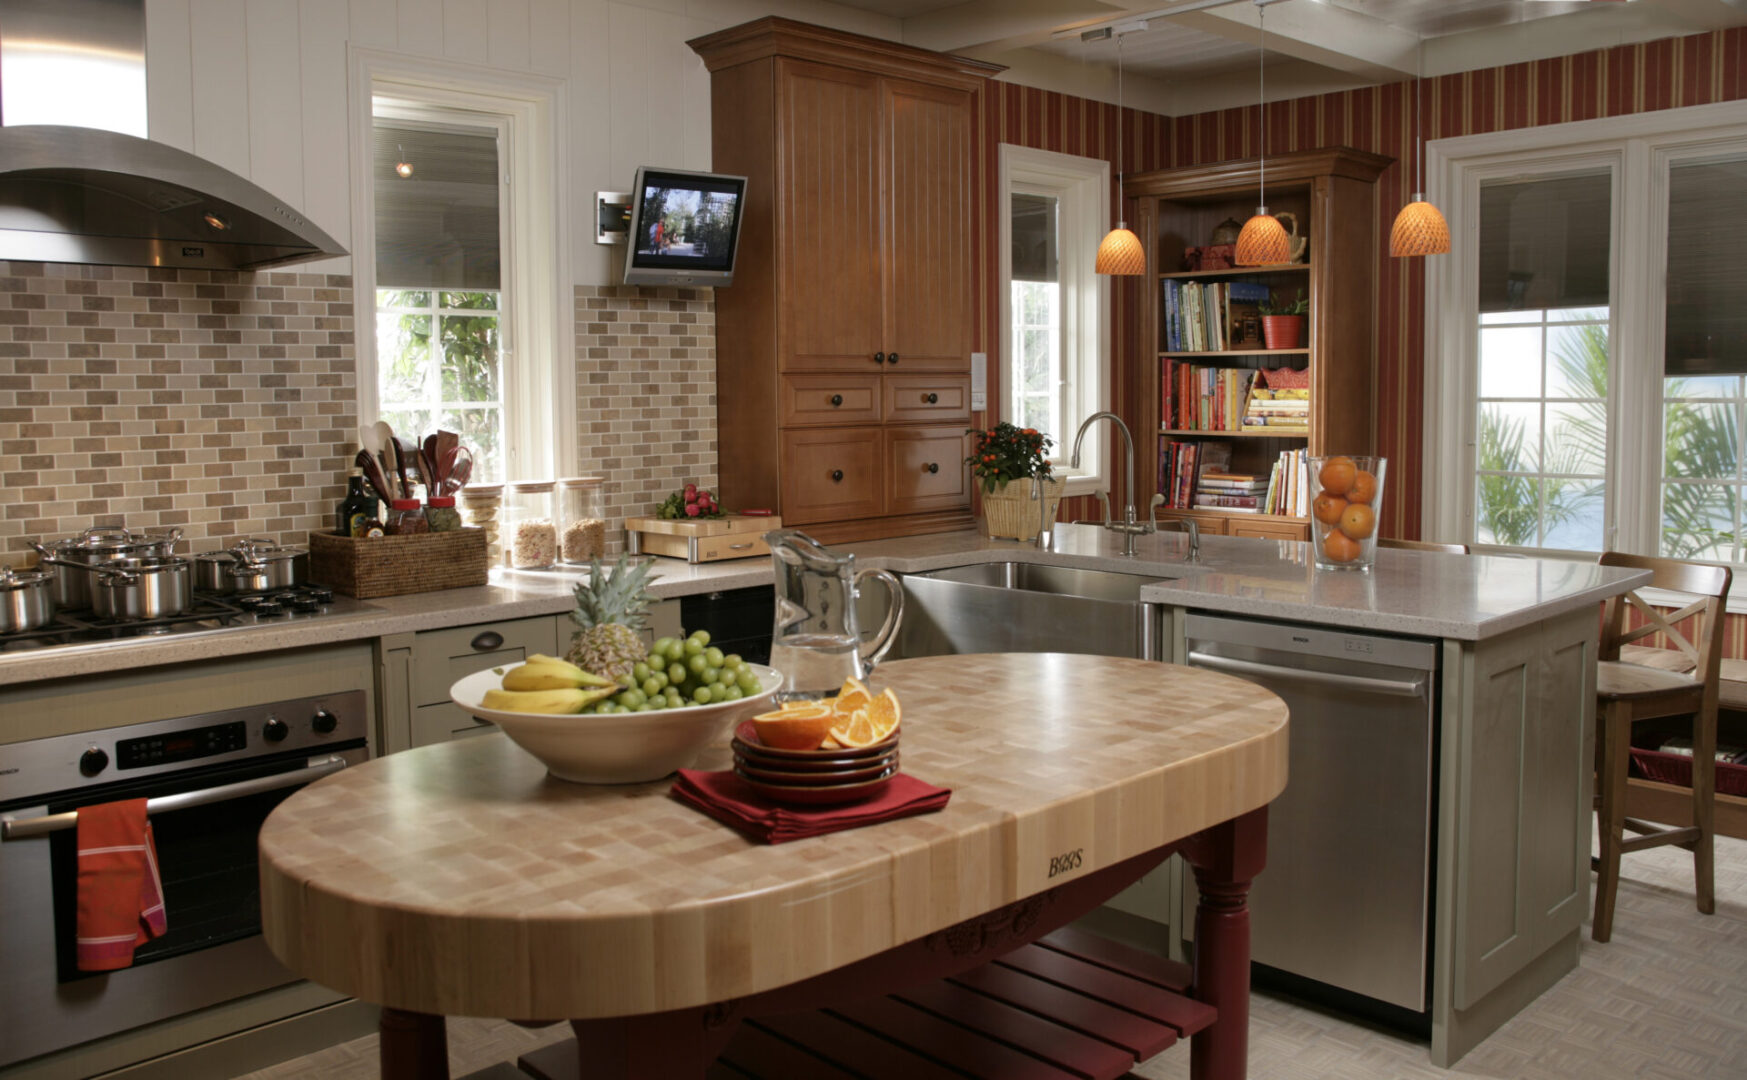 A kitchen with a table full of fruits